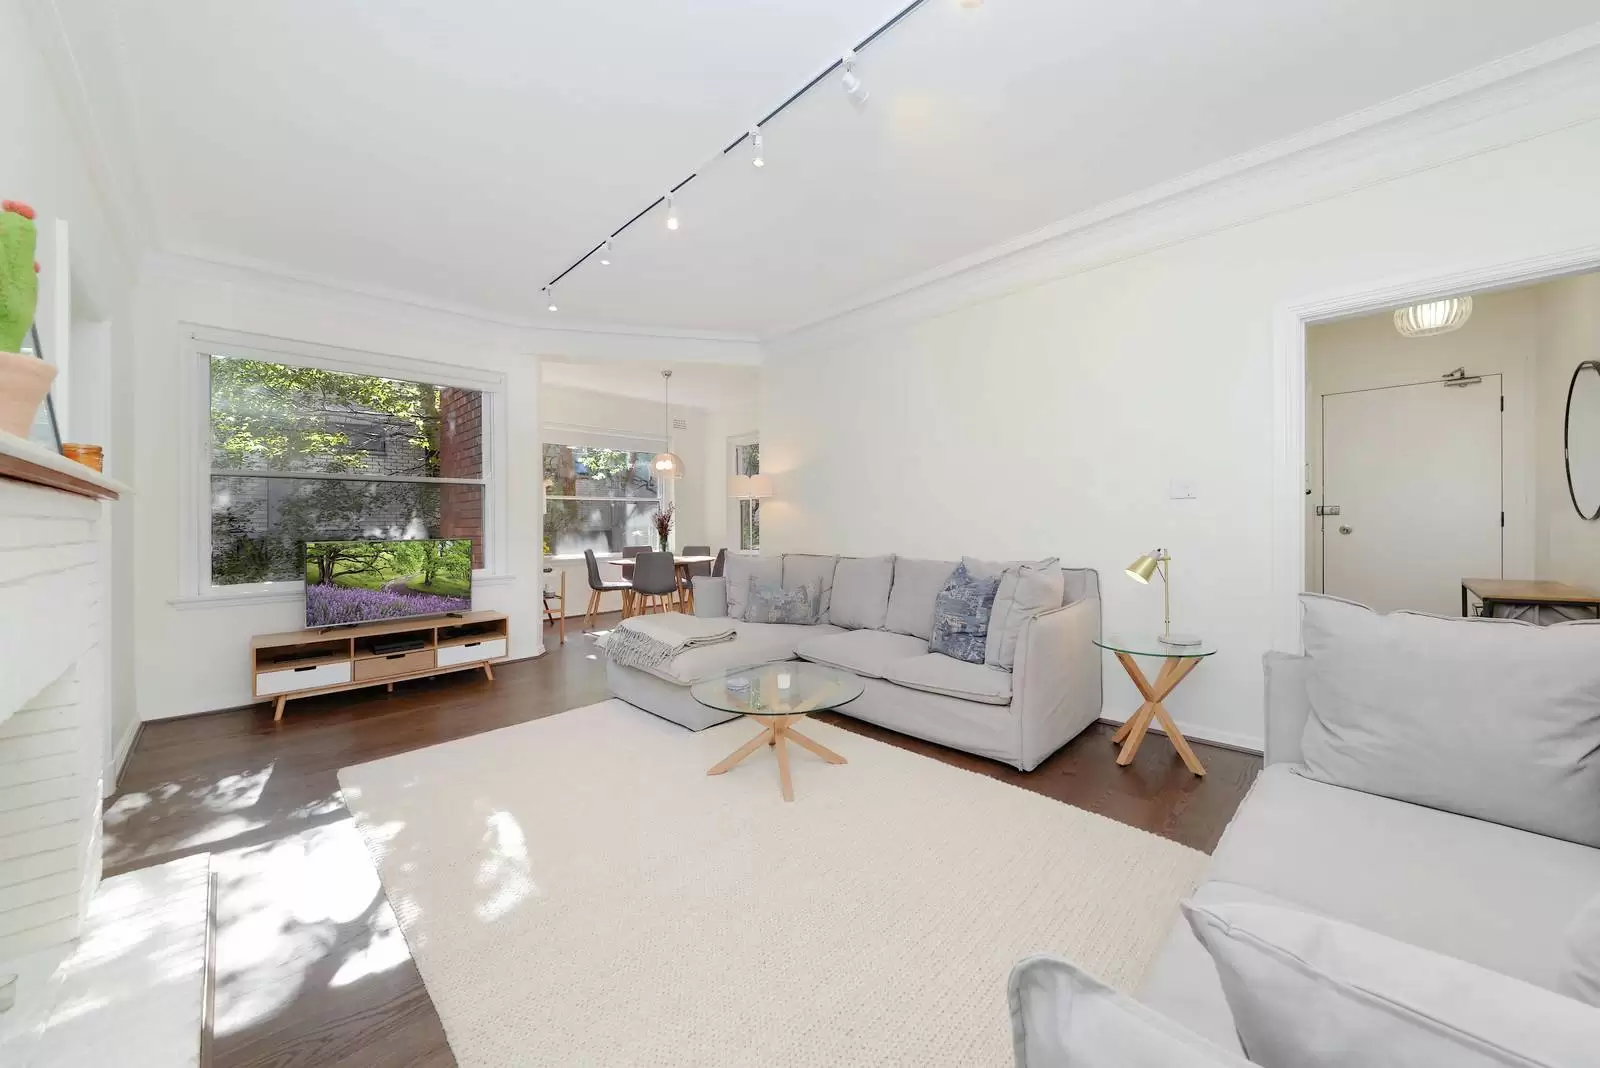 15/22 Greenoaks Avenue, Double Bay Leased by Sydney Sotheby's International Realty - image 1